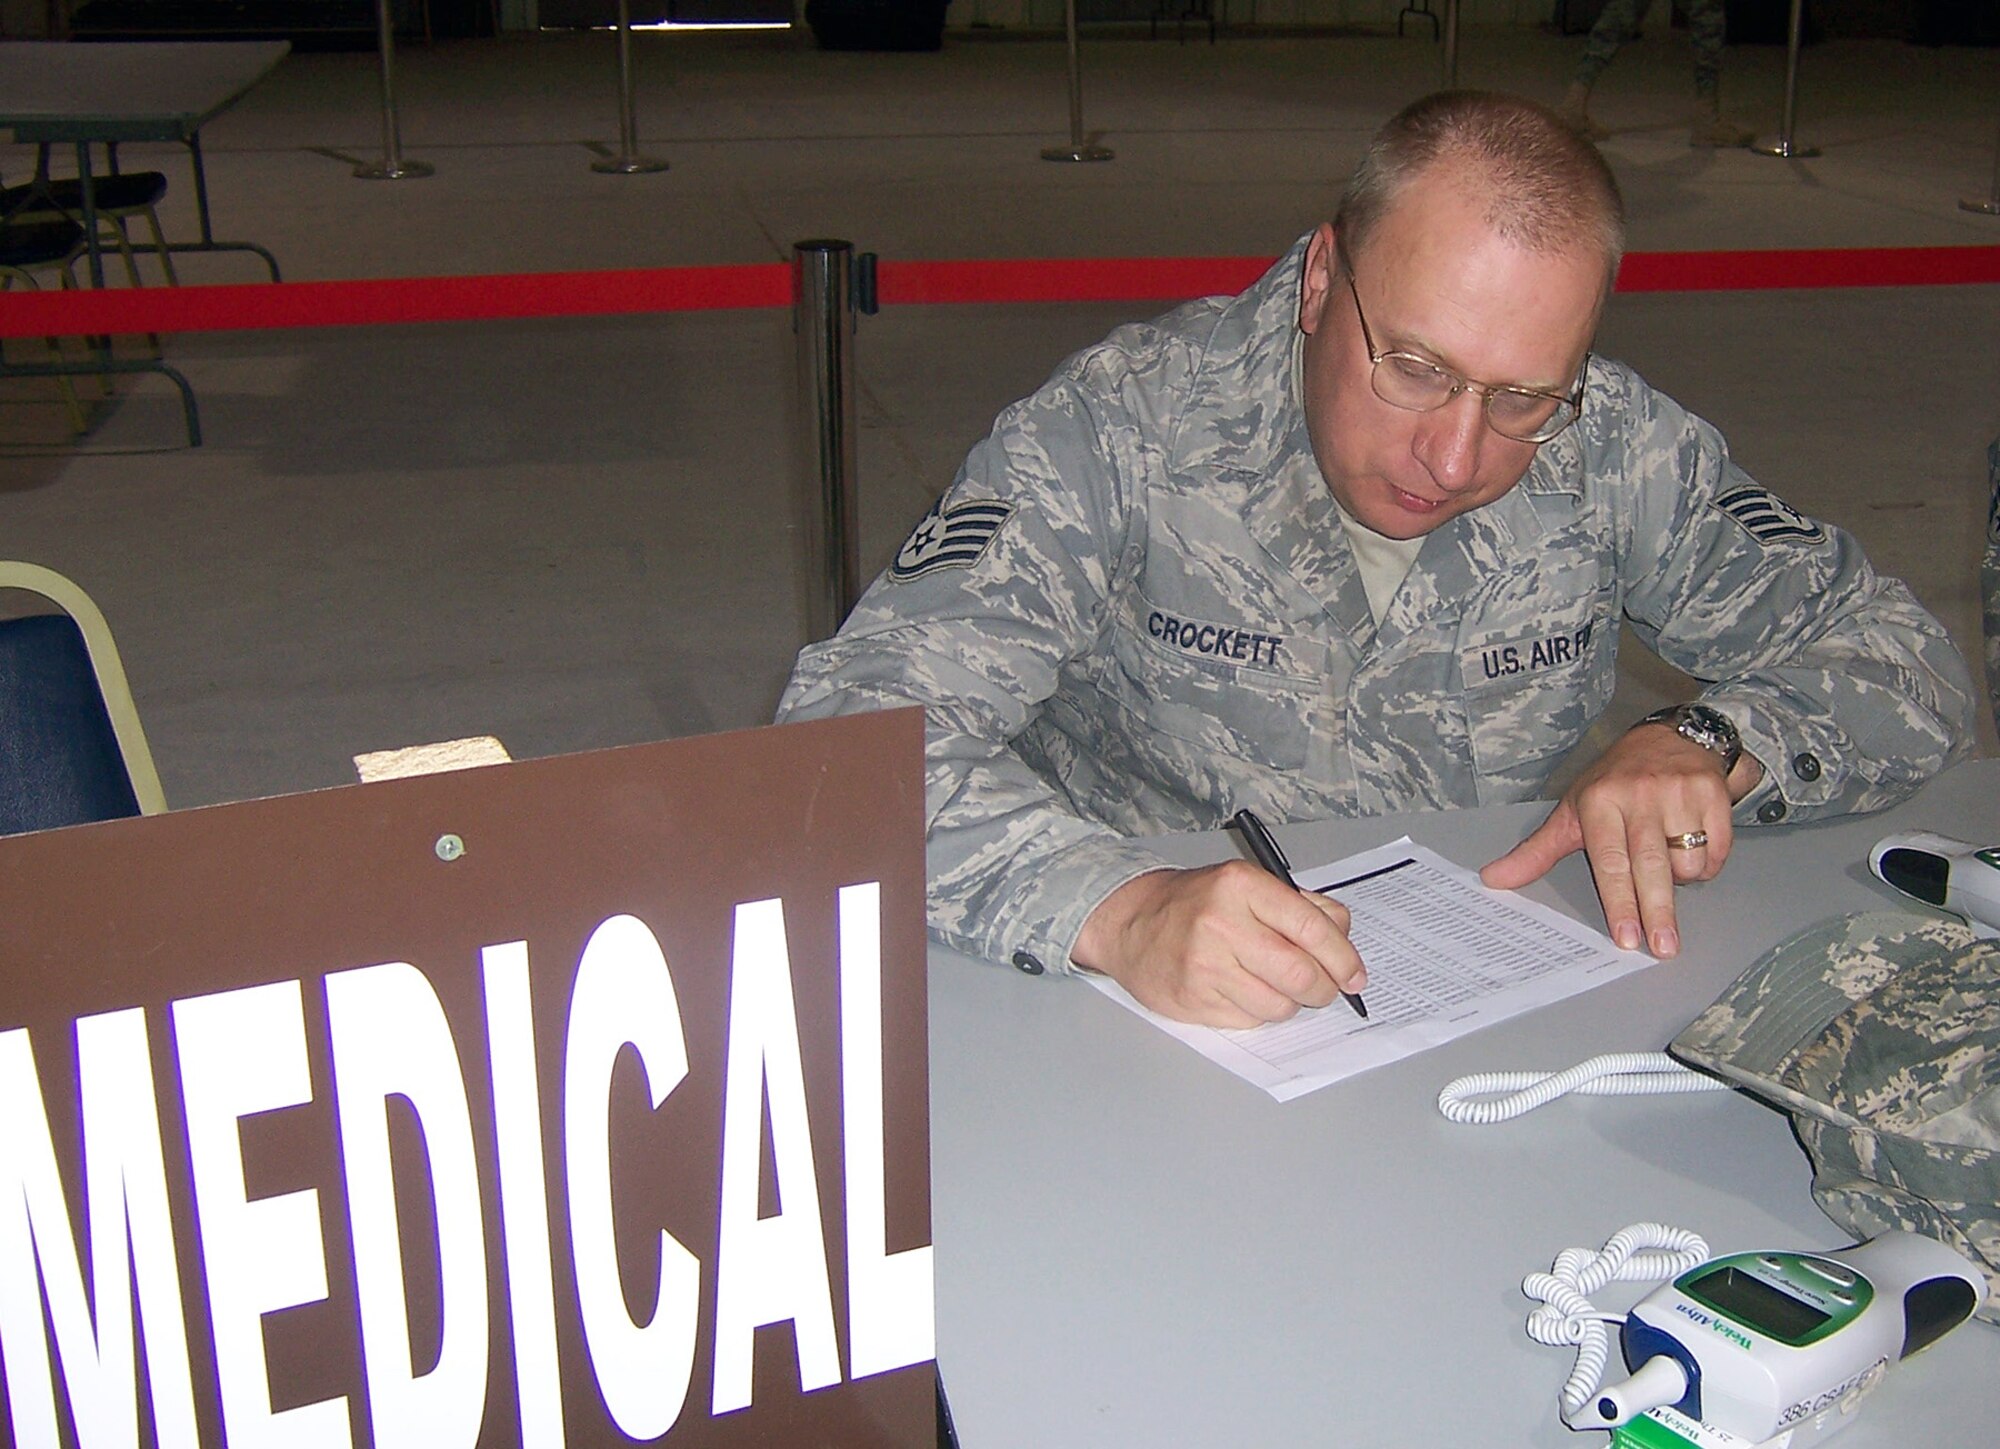 SOUTHWEST ASIA - Staff Sgt. Earl Crockett, 386th Expeditionary Medical Group, is deployed from Hill Air Force Base, Utah. (U.S. Air Force courtesy photo)